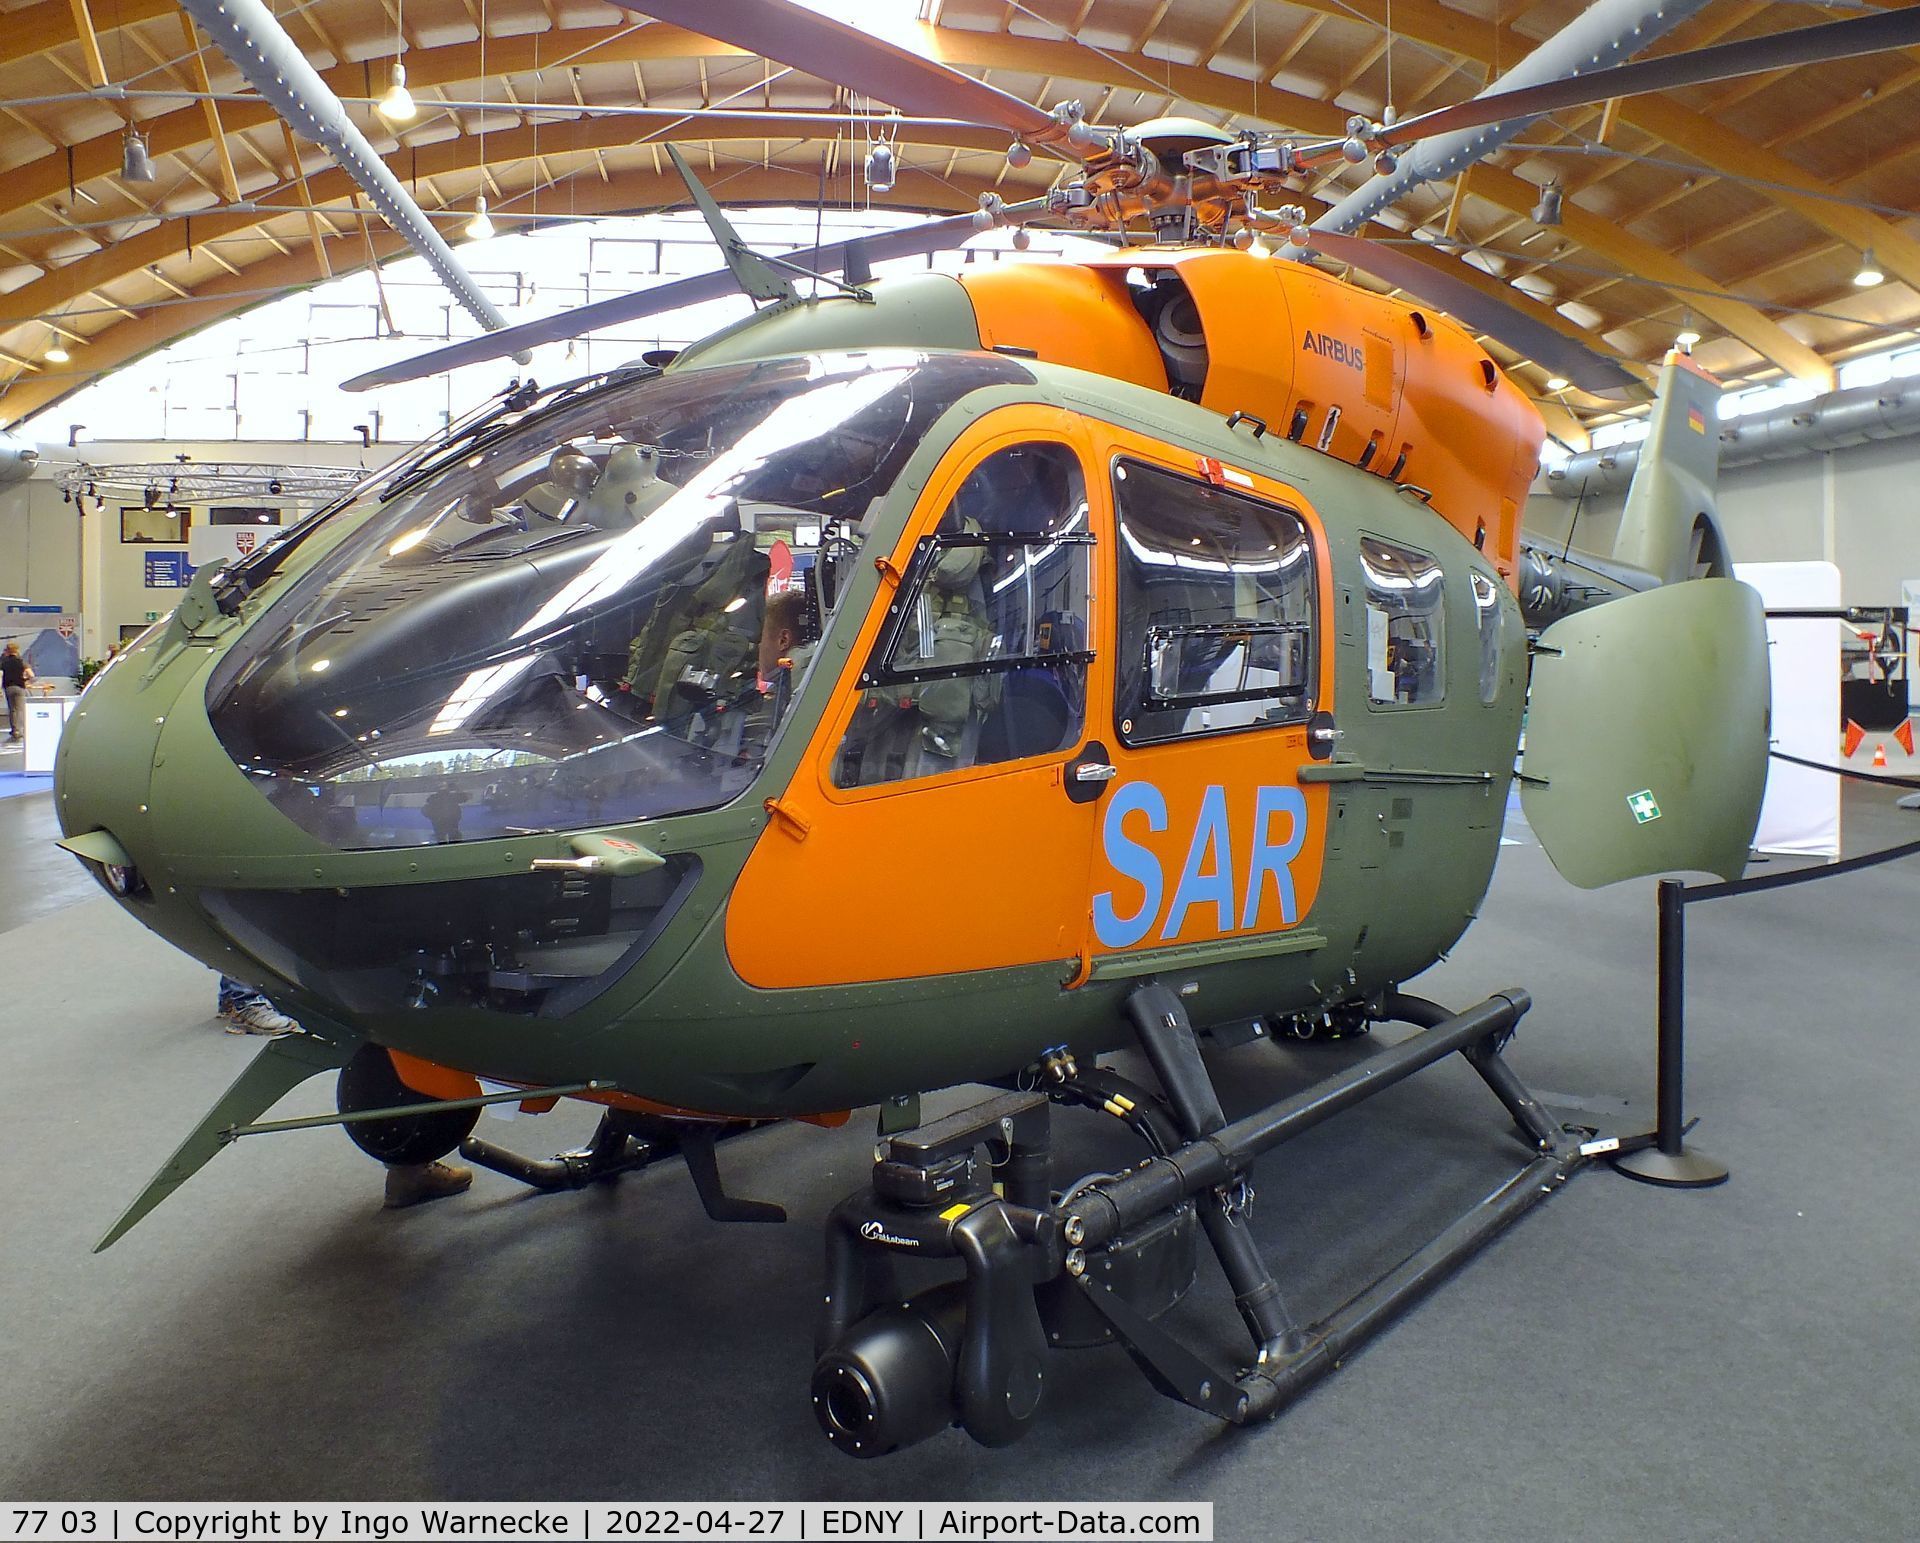 77 03, 2022 Airbus Helicopters H-145M C/N 20308, Airbus Helicopters H145M of Heeresflieger (German army aviation) at the AERO 2022, Friedrichshafen